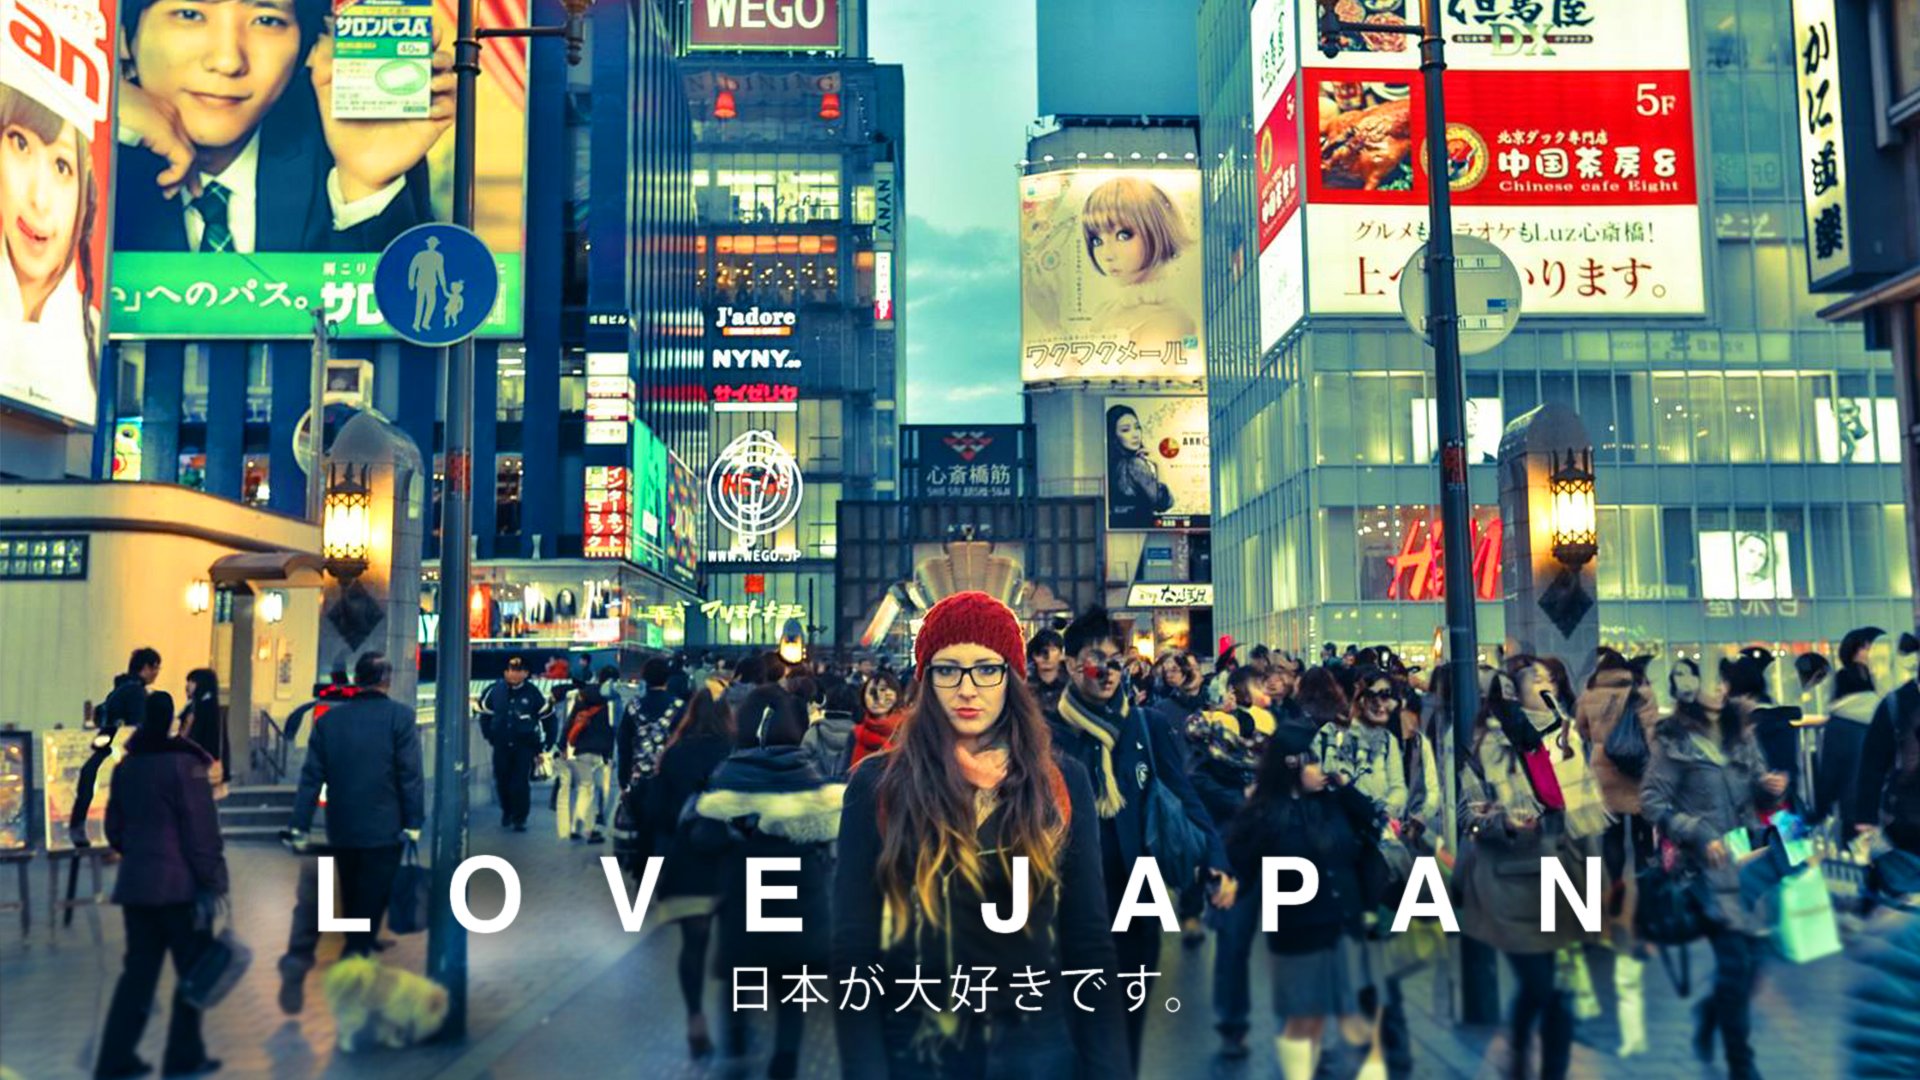 Watch this Video and Fall in Love with Japan (more)